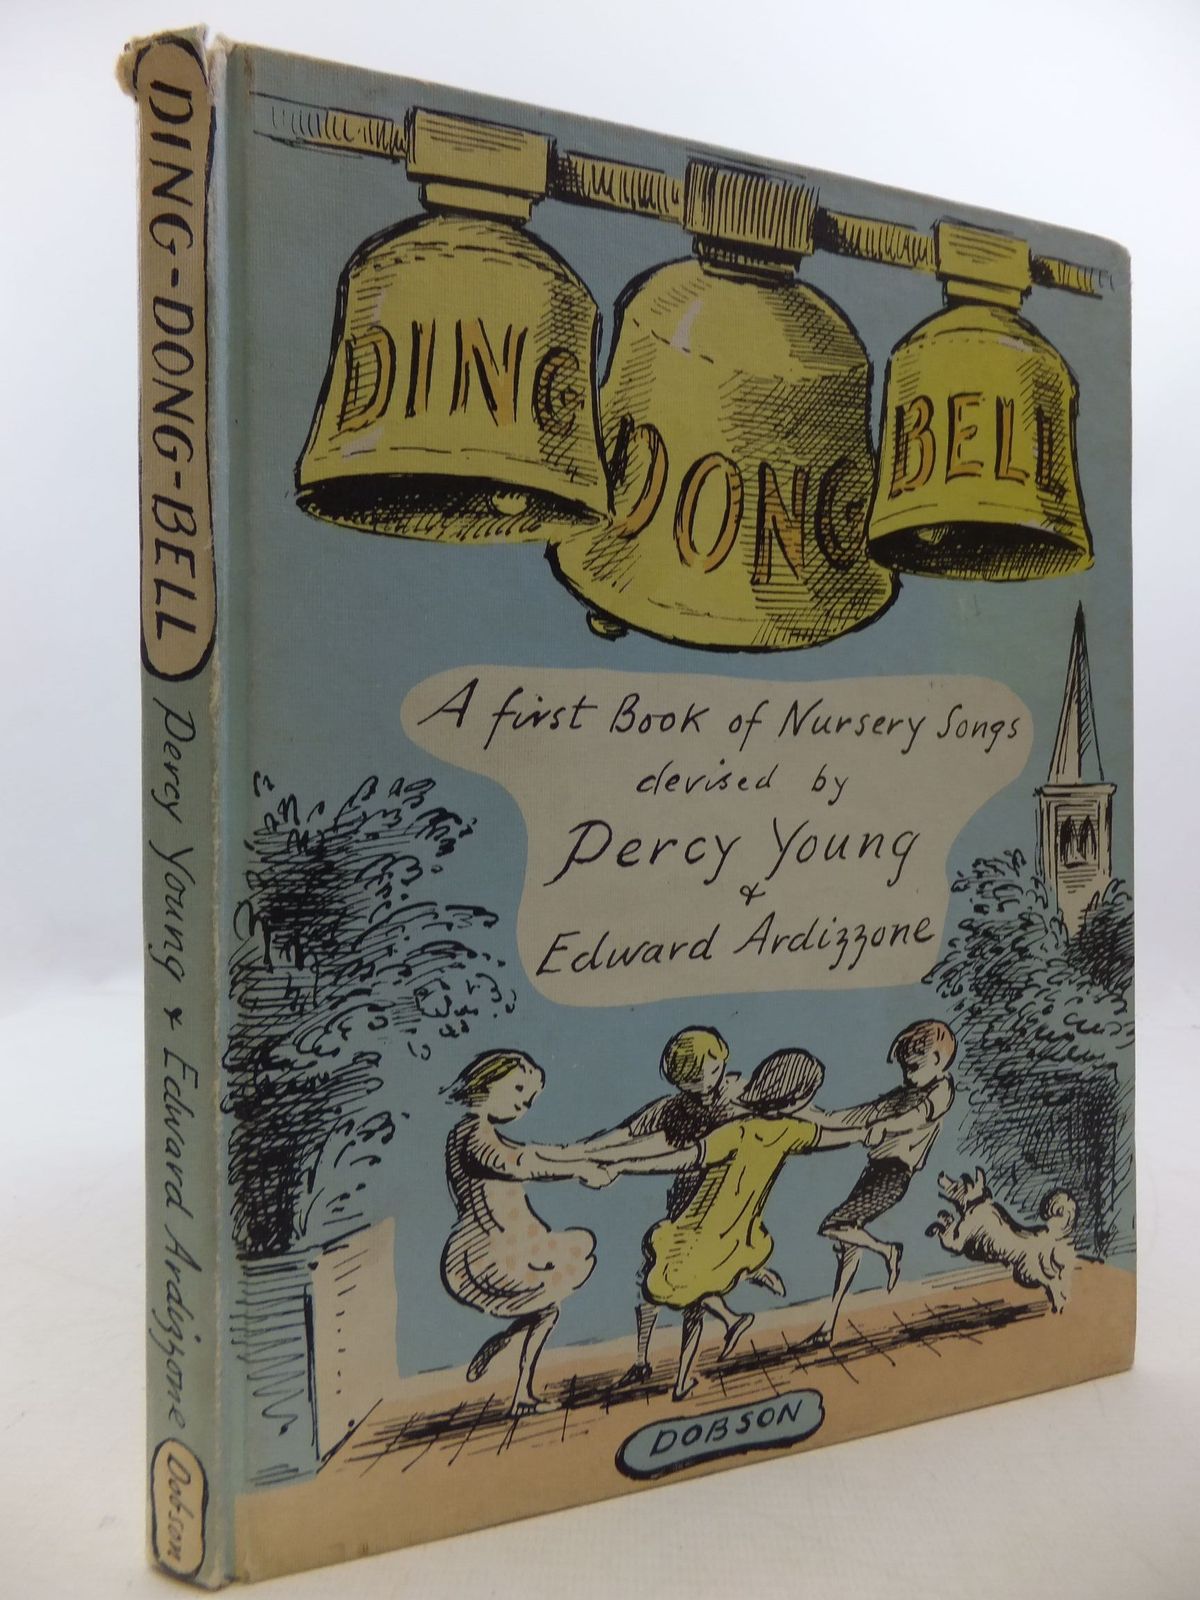 Stella Rose S Books Ding Dong Bell Written By Percy Young Edward Ardizzone Stock Code